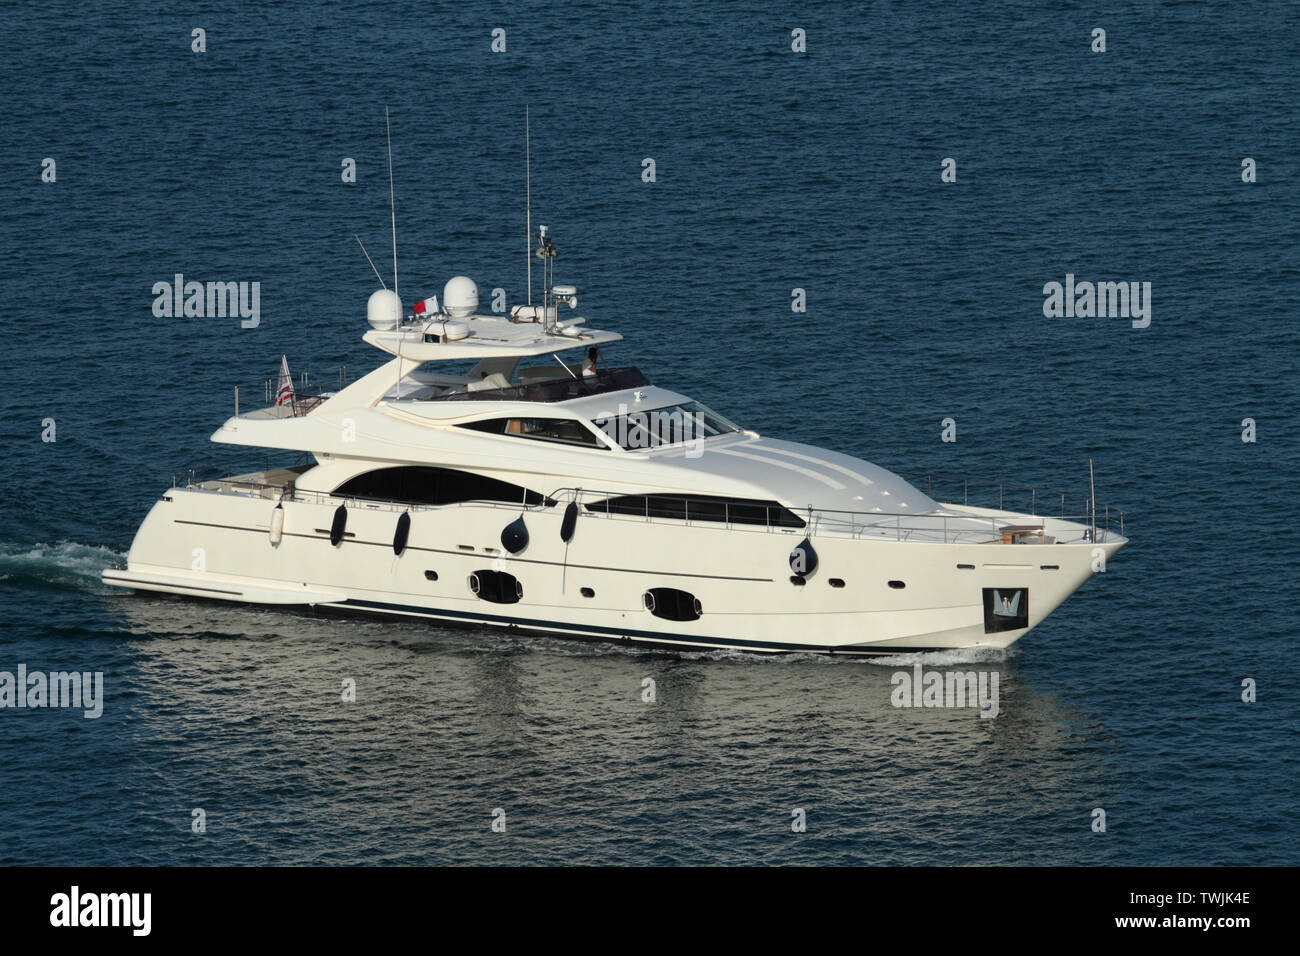 Ferretti Custom Line 97 97-foot (29.7m) luxury yacht. No ownership details visible. Stock Photo